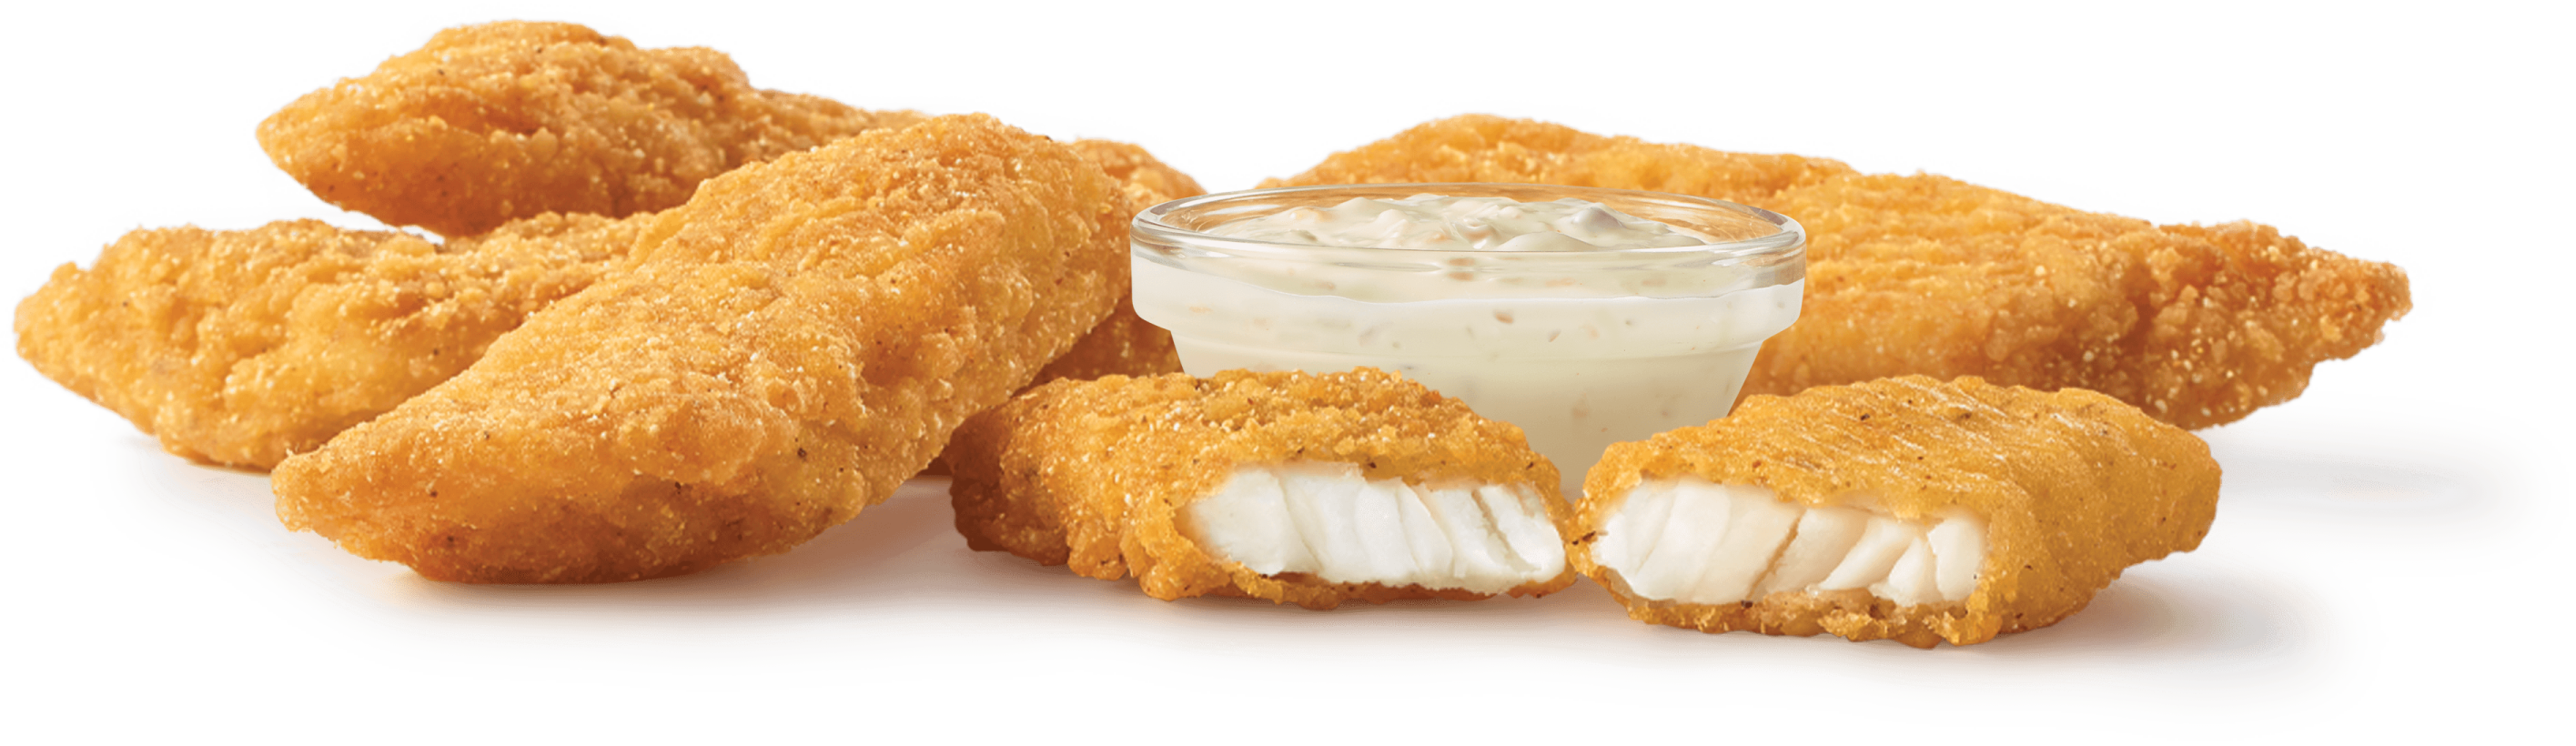 Arby's 5 Piece Hushpuppy Breaded Fish Strips Nutrition Facts